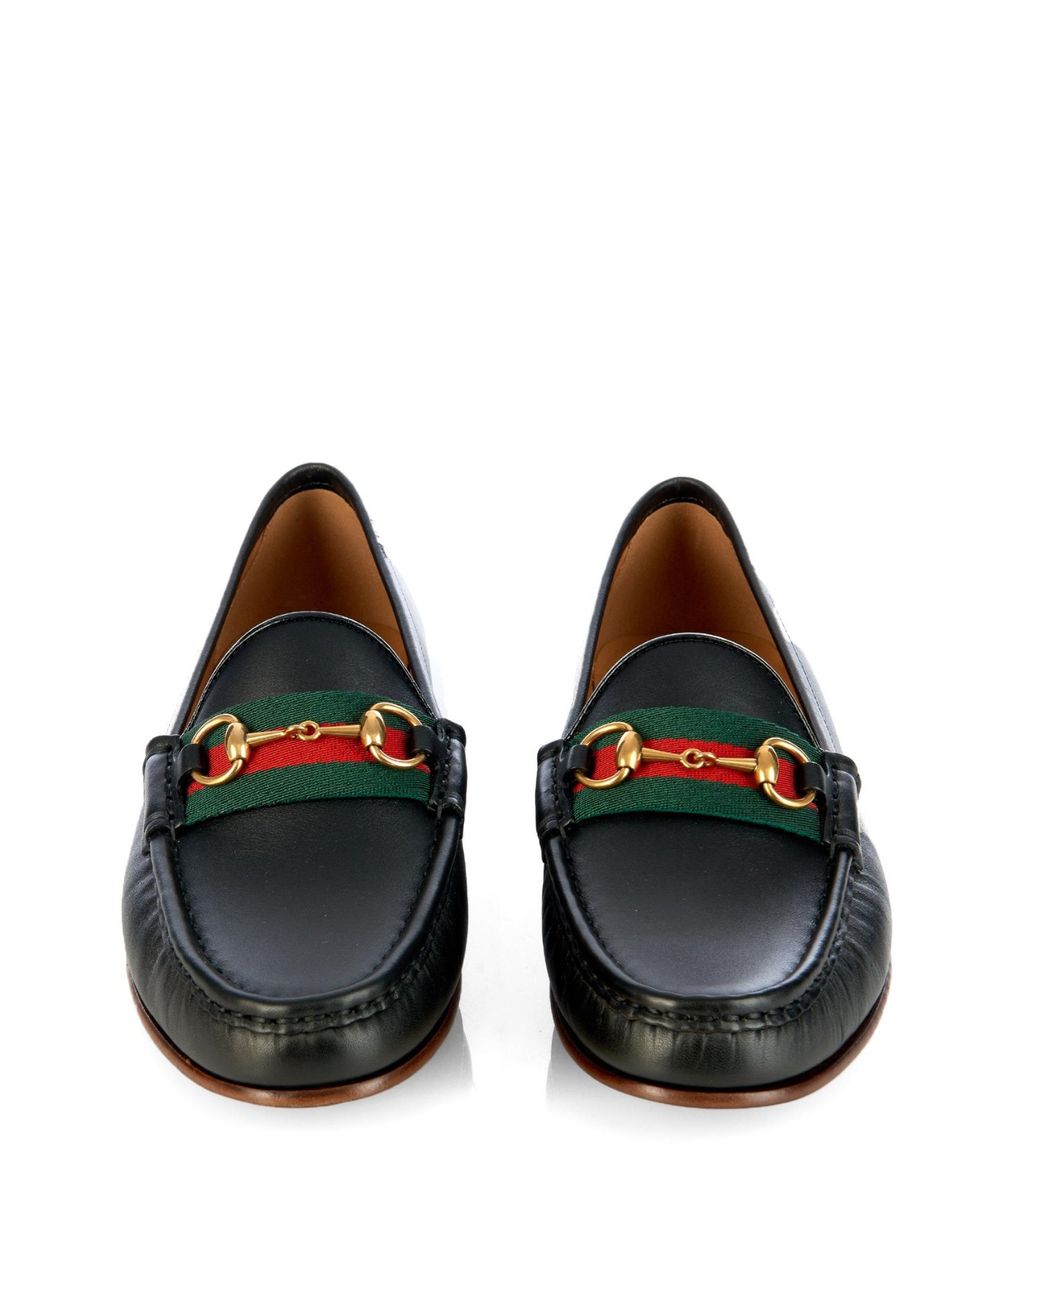 Gucci Horsebit And Web Leather Loafers in Black | Lyst